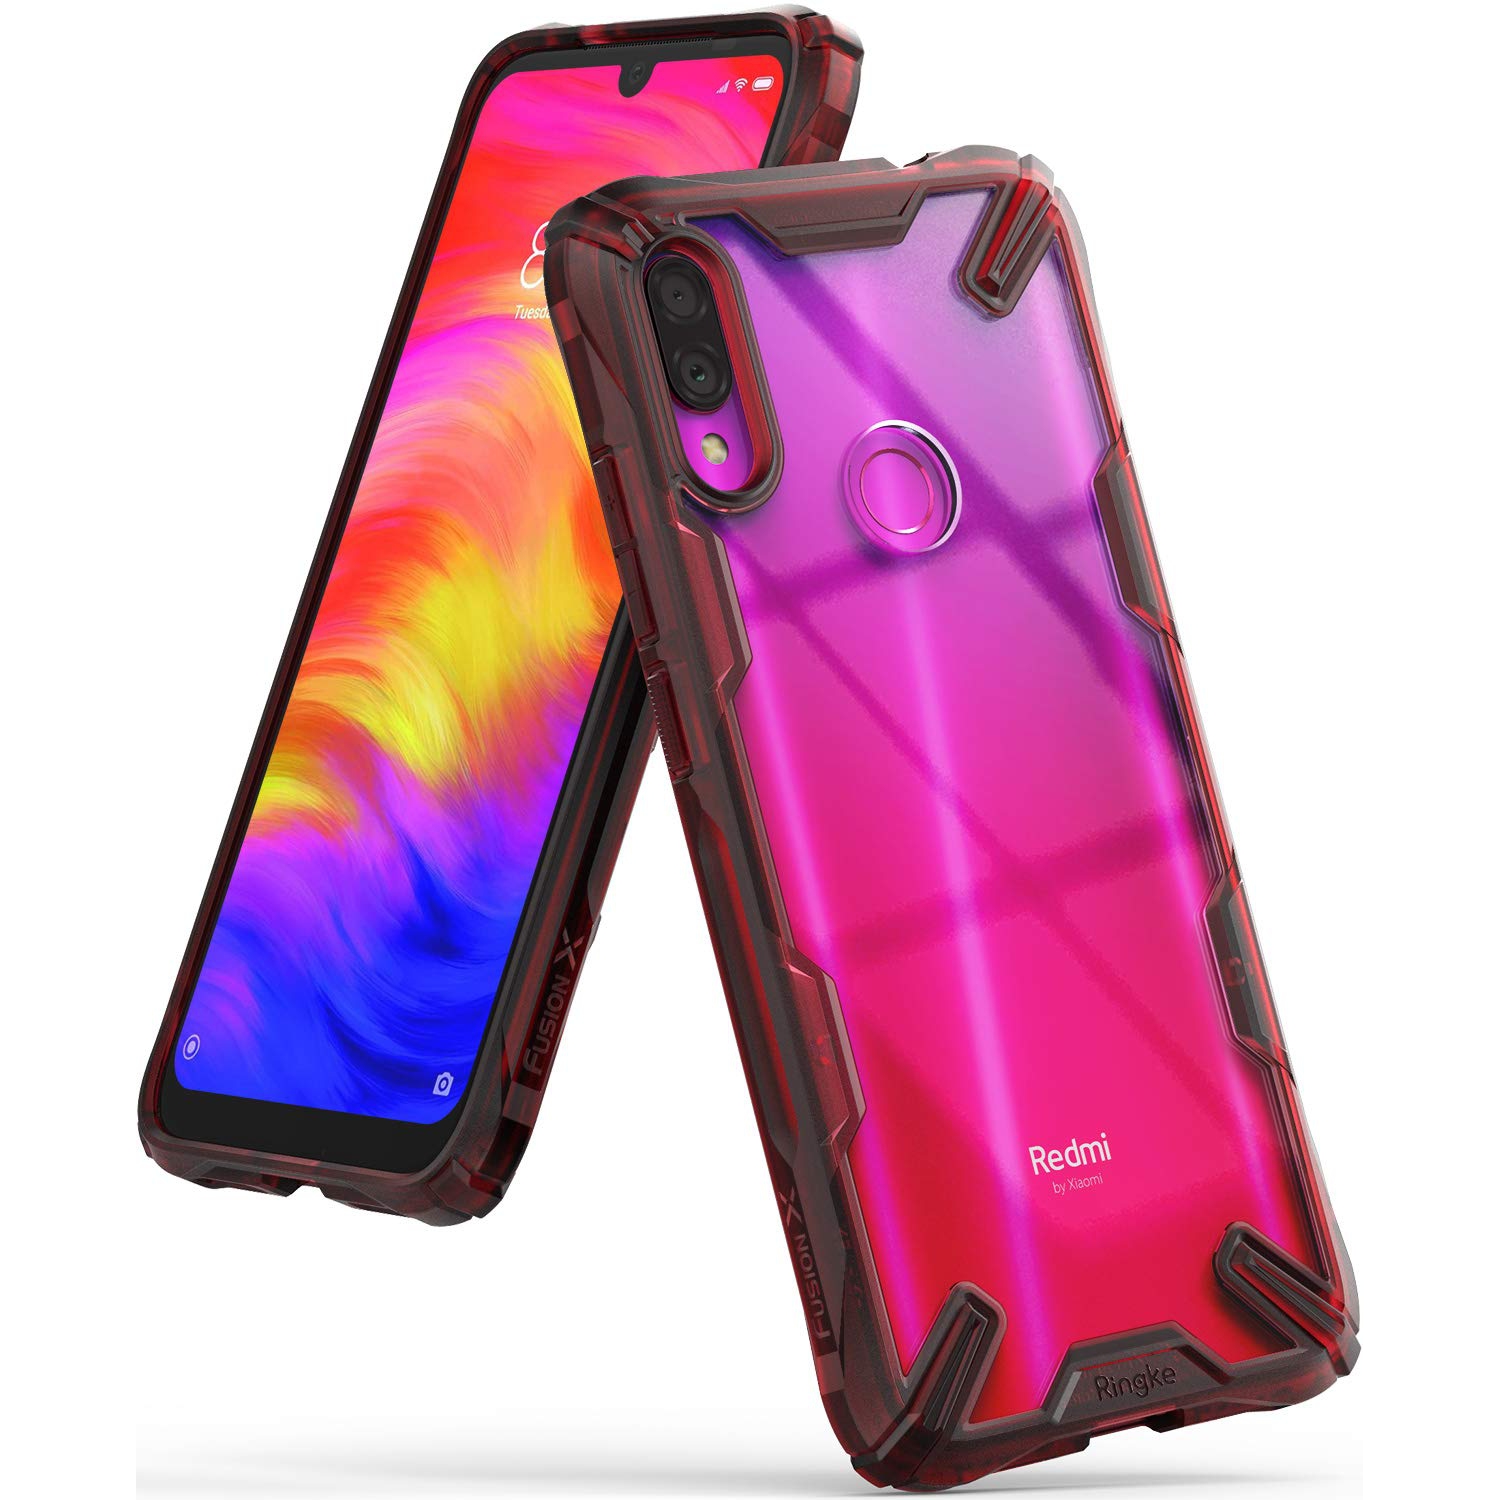 Ringke Fusion-X Designed for Xiaomi Redmi Note 7, Note 7 Pro Case, PC + Flexible TPU Protection Cover - Ruby Red